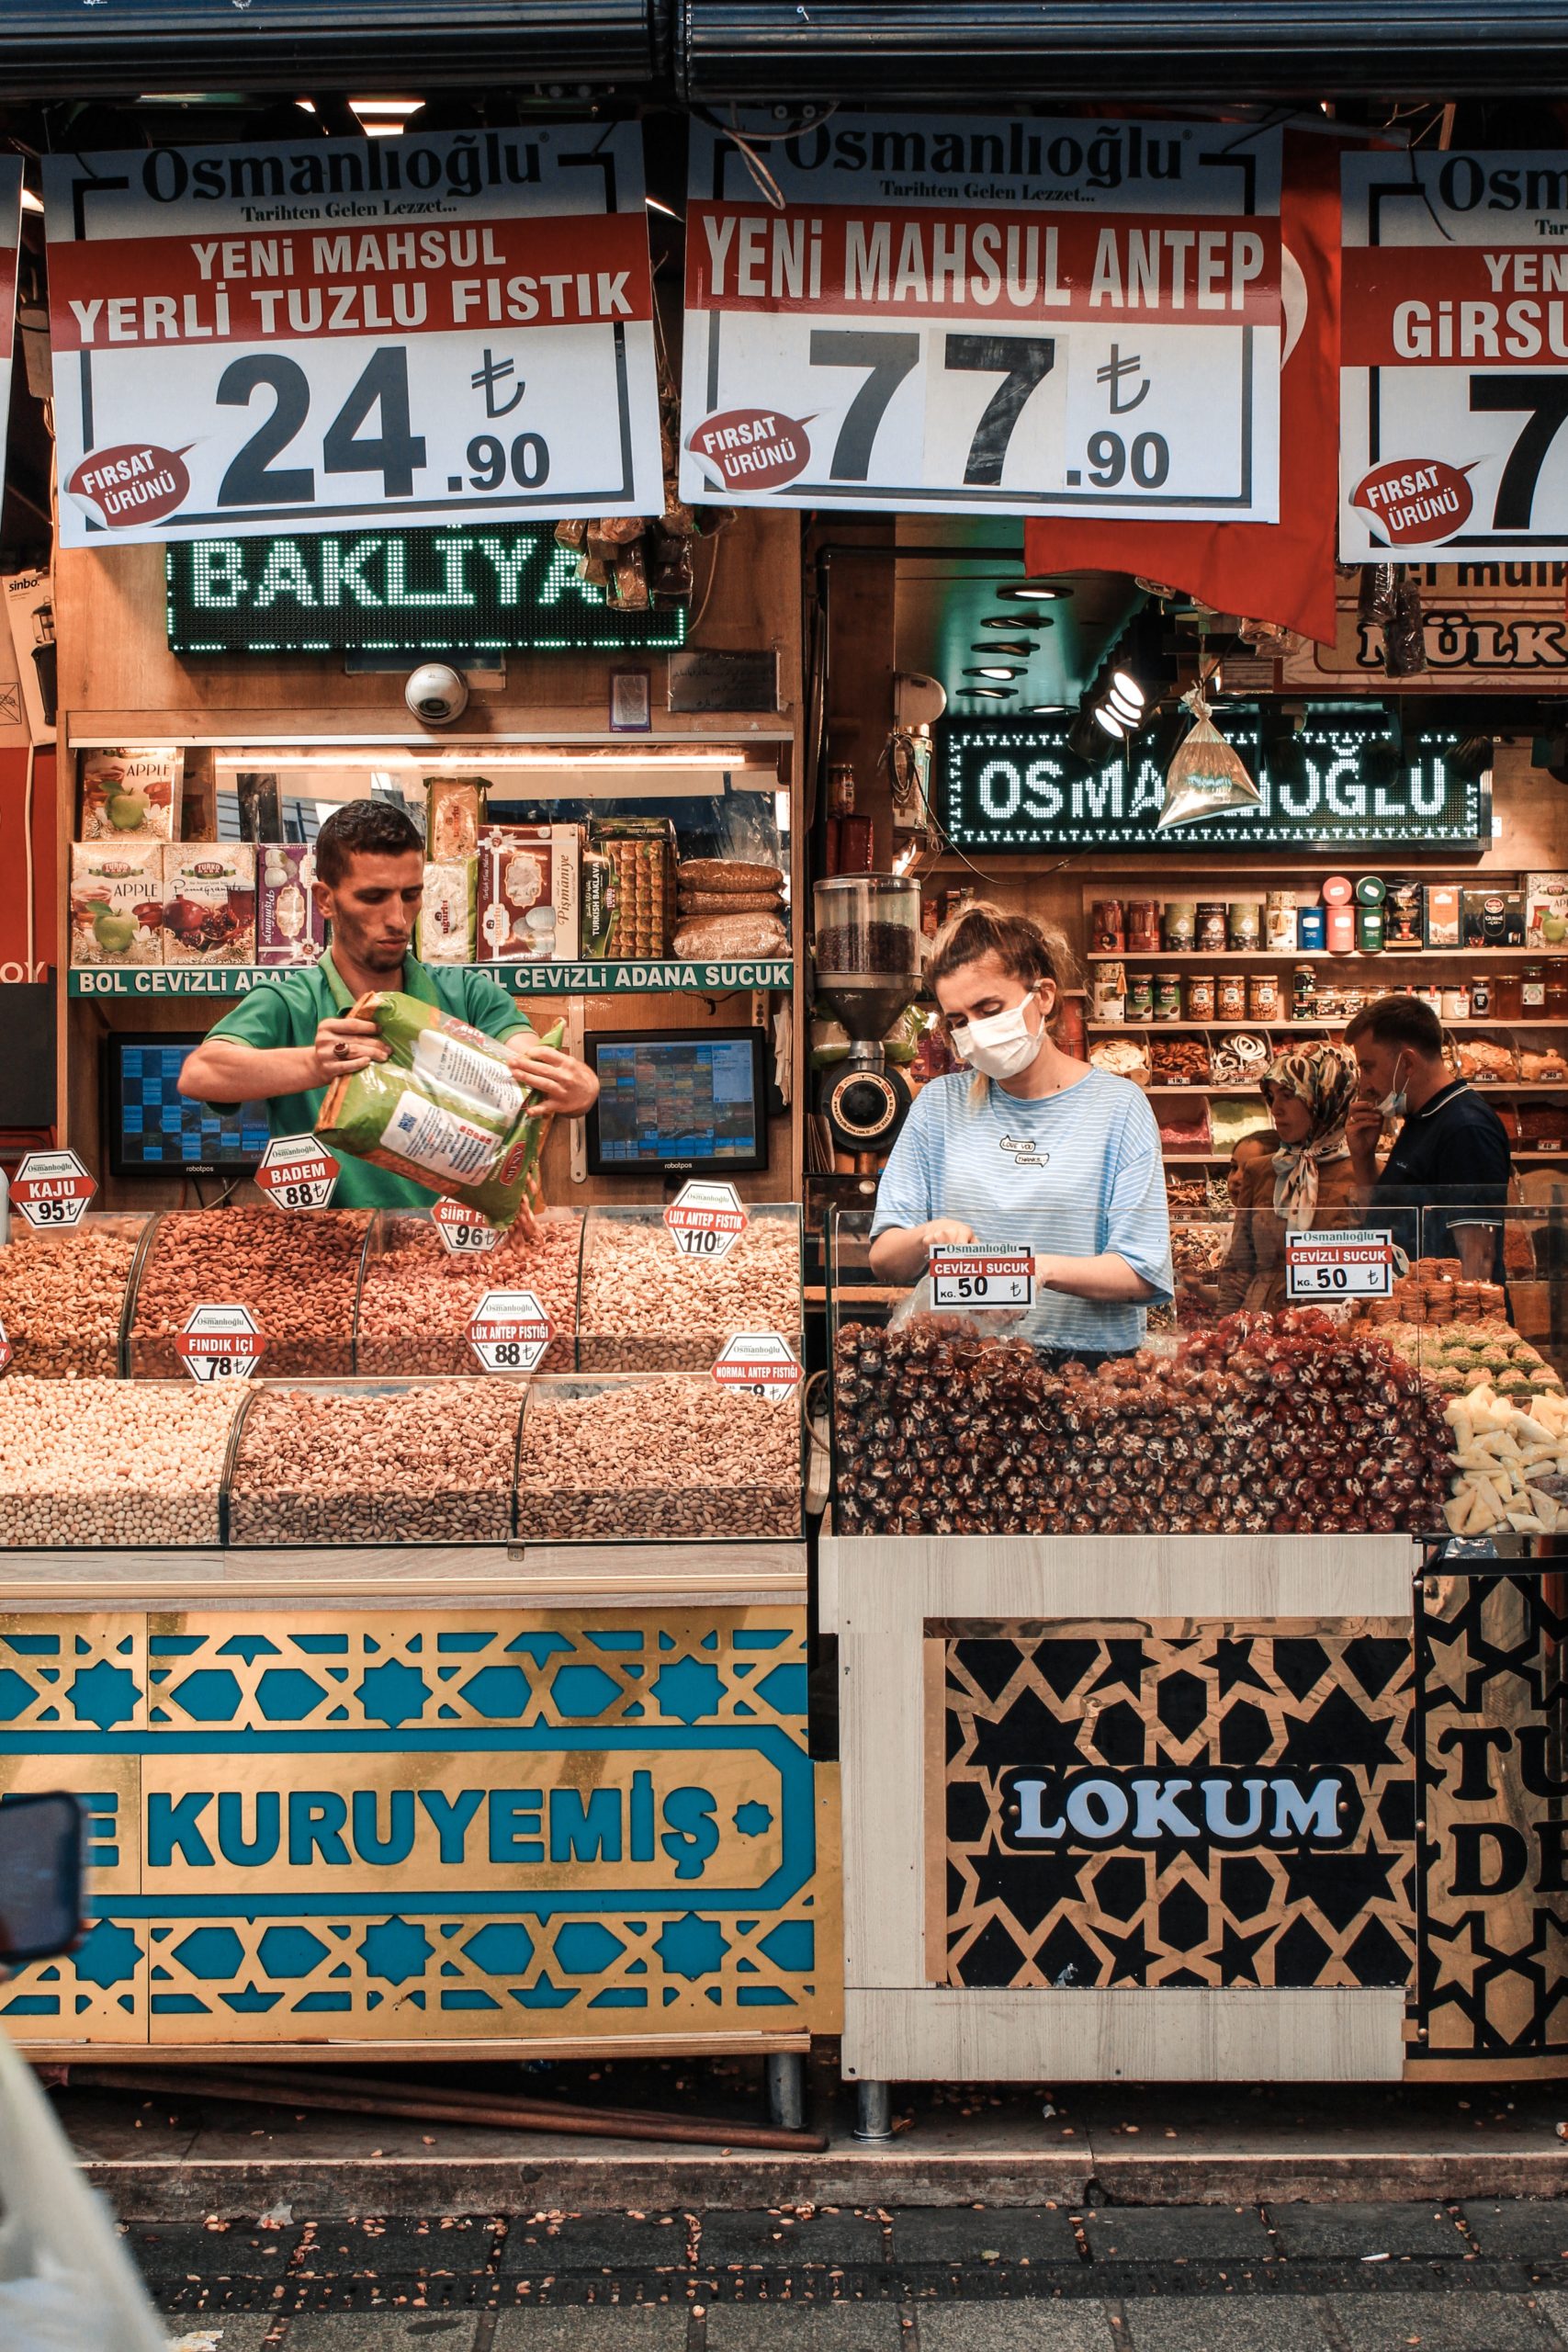 Turkey’s Inflation Hits 24-Years High. Will “Non-Conventional” Erdogan-nomics Save The Country From Rising Inflationary Pressure?